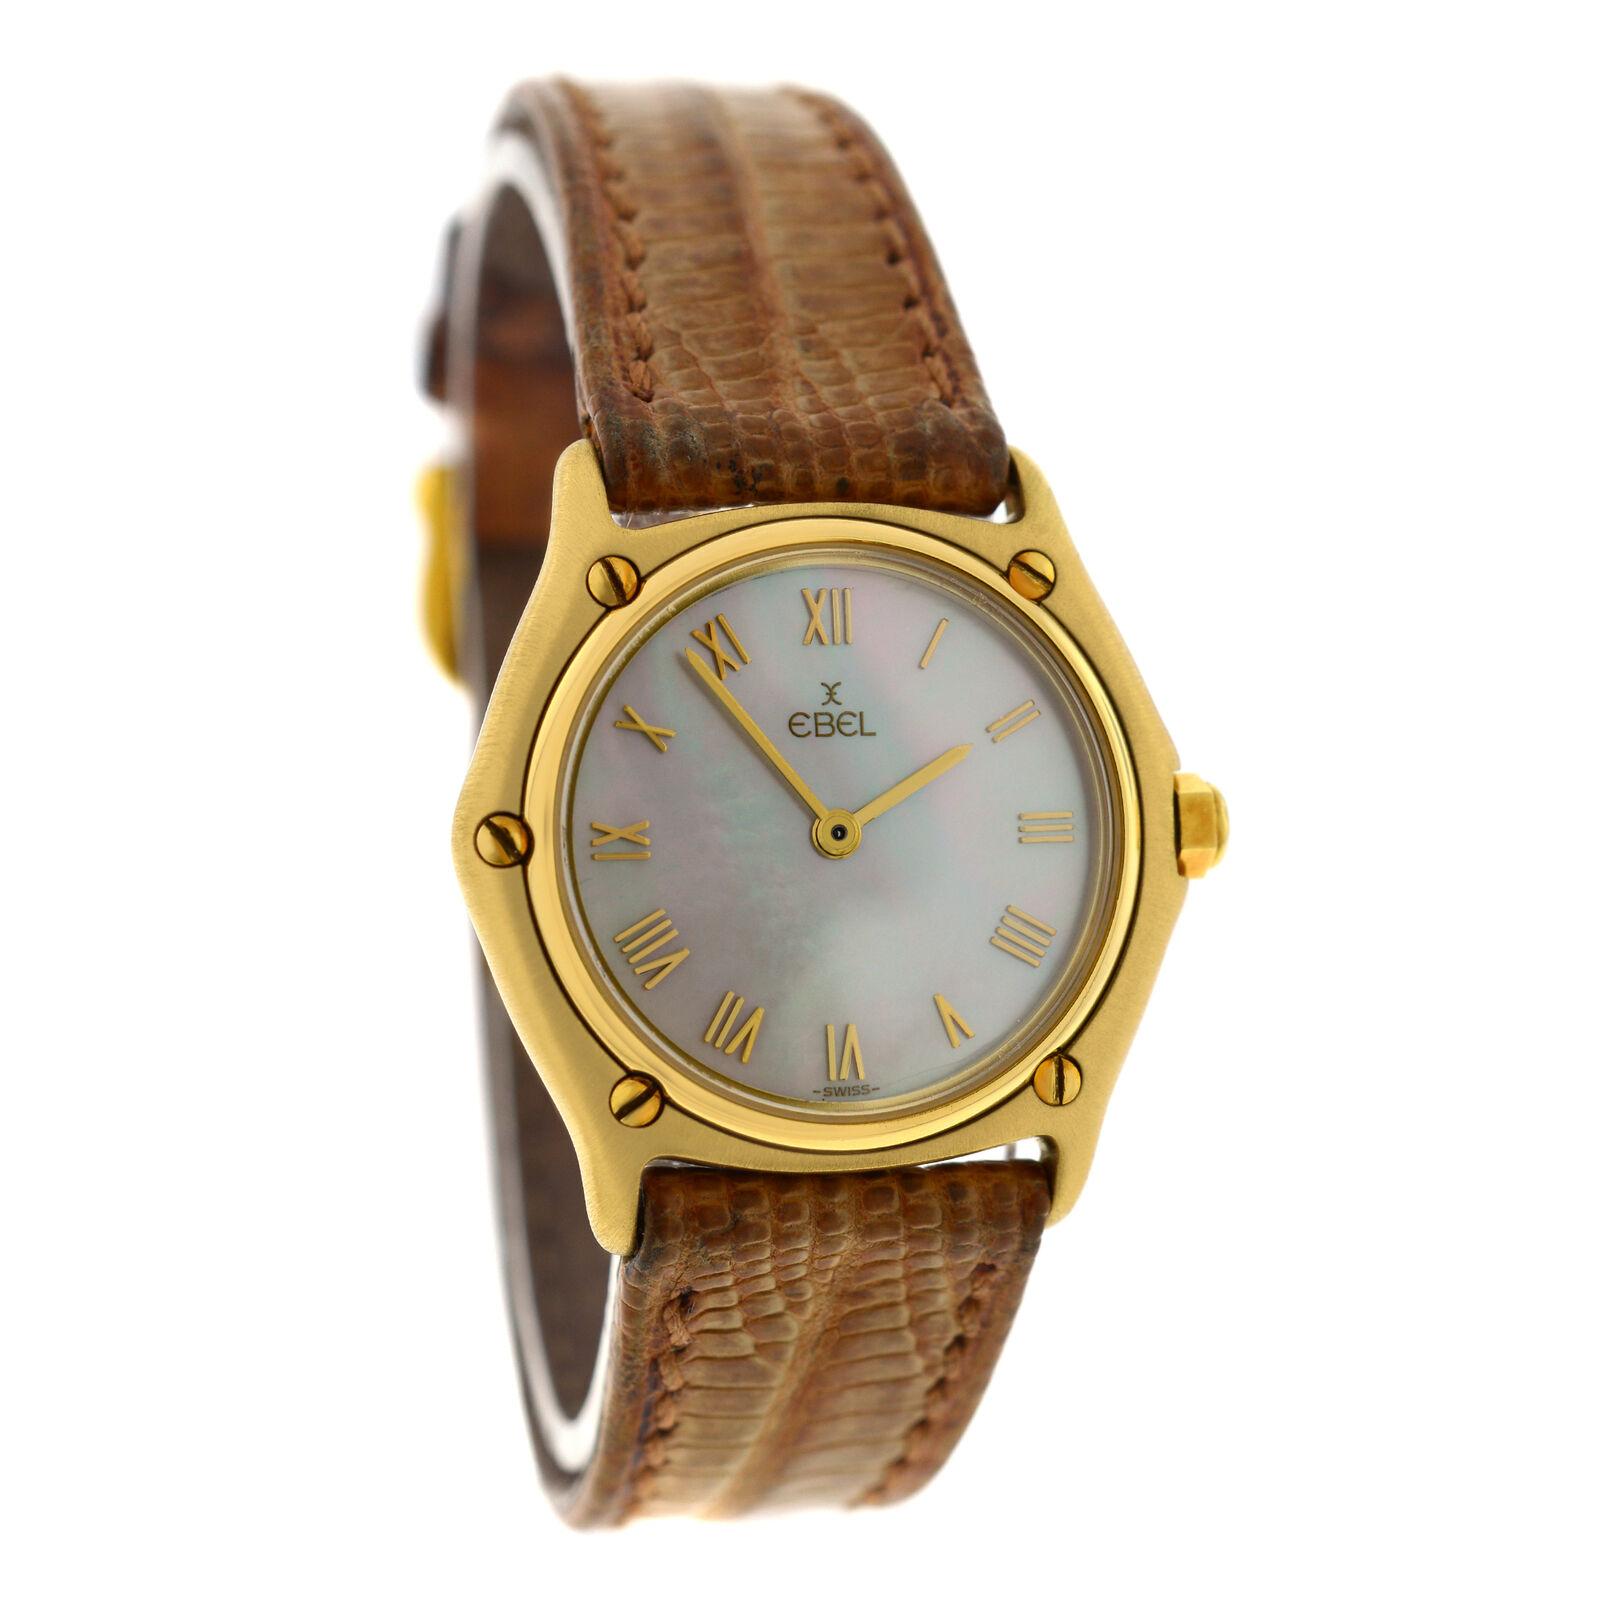 Brand	Ebel
Model	Classic
Gender	Ladies
Condition	Pre-Owned
Movement	Swiss Quartz
Case Material	18K Yellow Gold
Bracelet / Strap Material	Leather
Clasp / Buckle Material	18K Gold plated
Clasp Type	Tang
Bracelet / Strap width	15 mm at lugs
Total